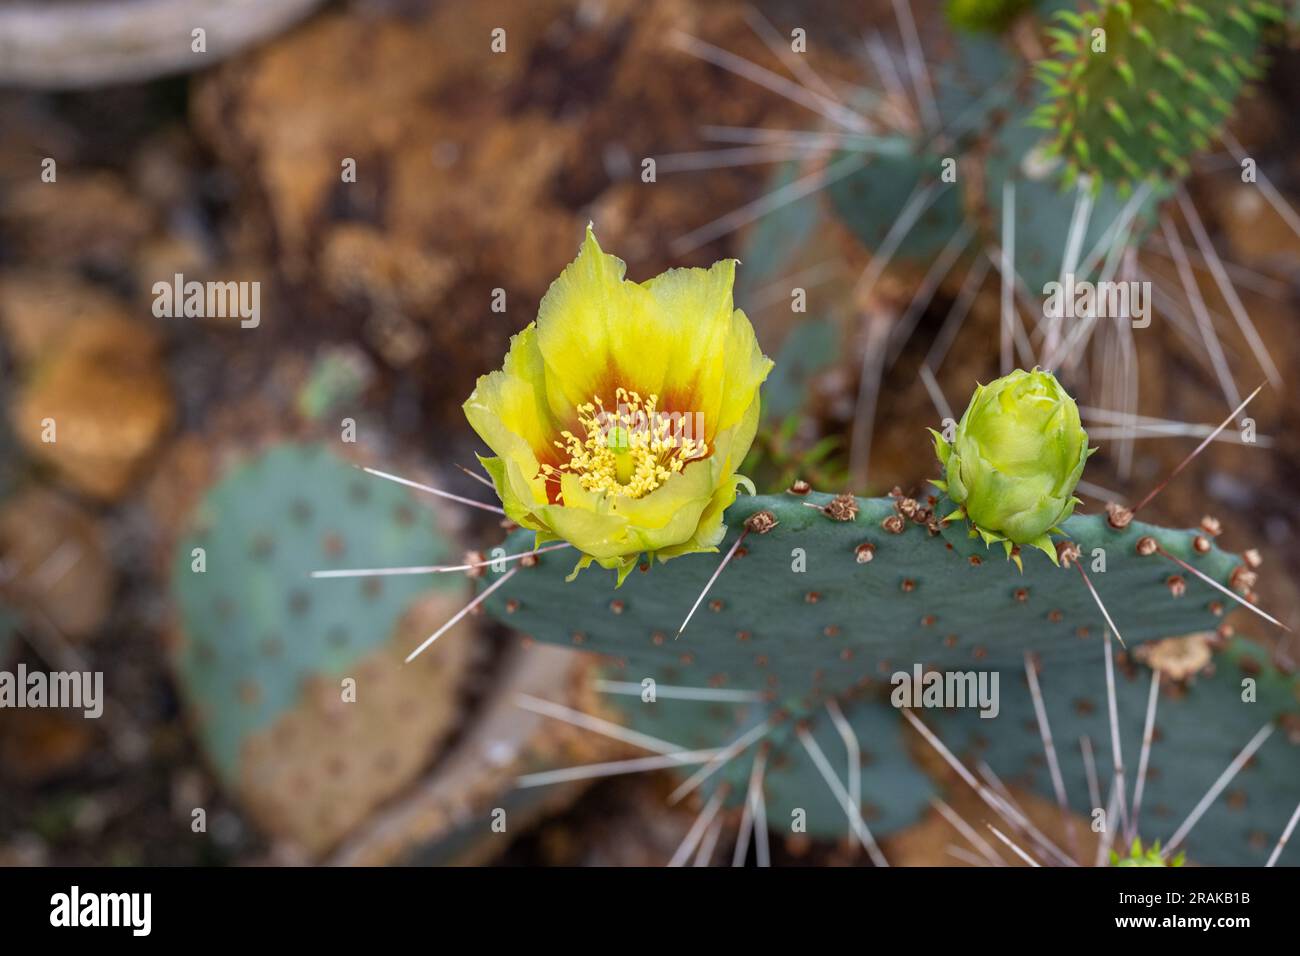 Prickly pears cactus (opuntia microdasys) with golden flowers. Stock Photo